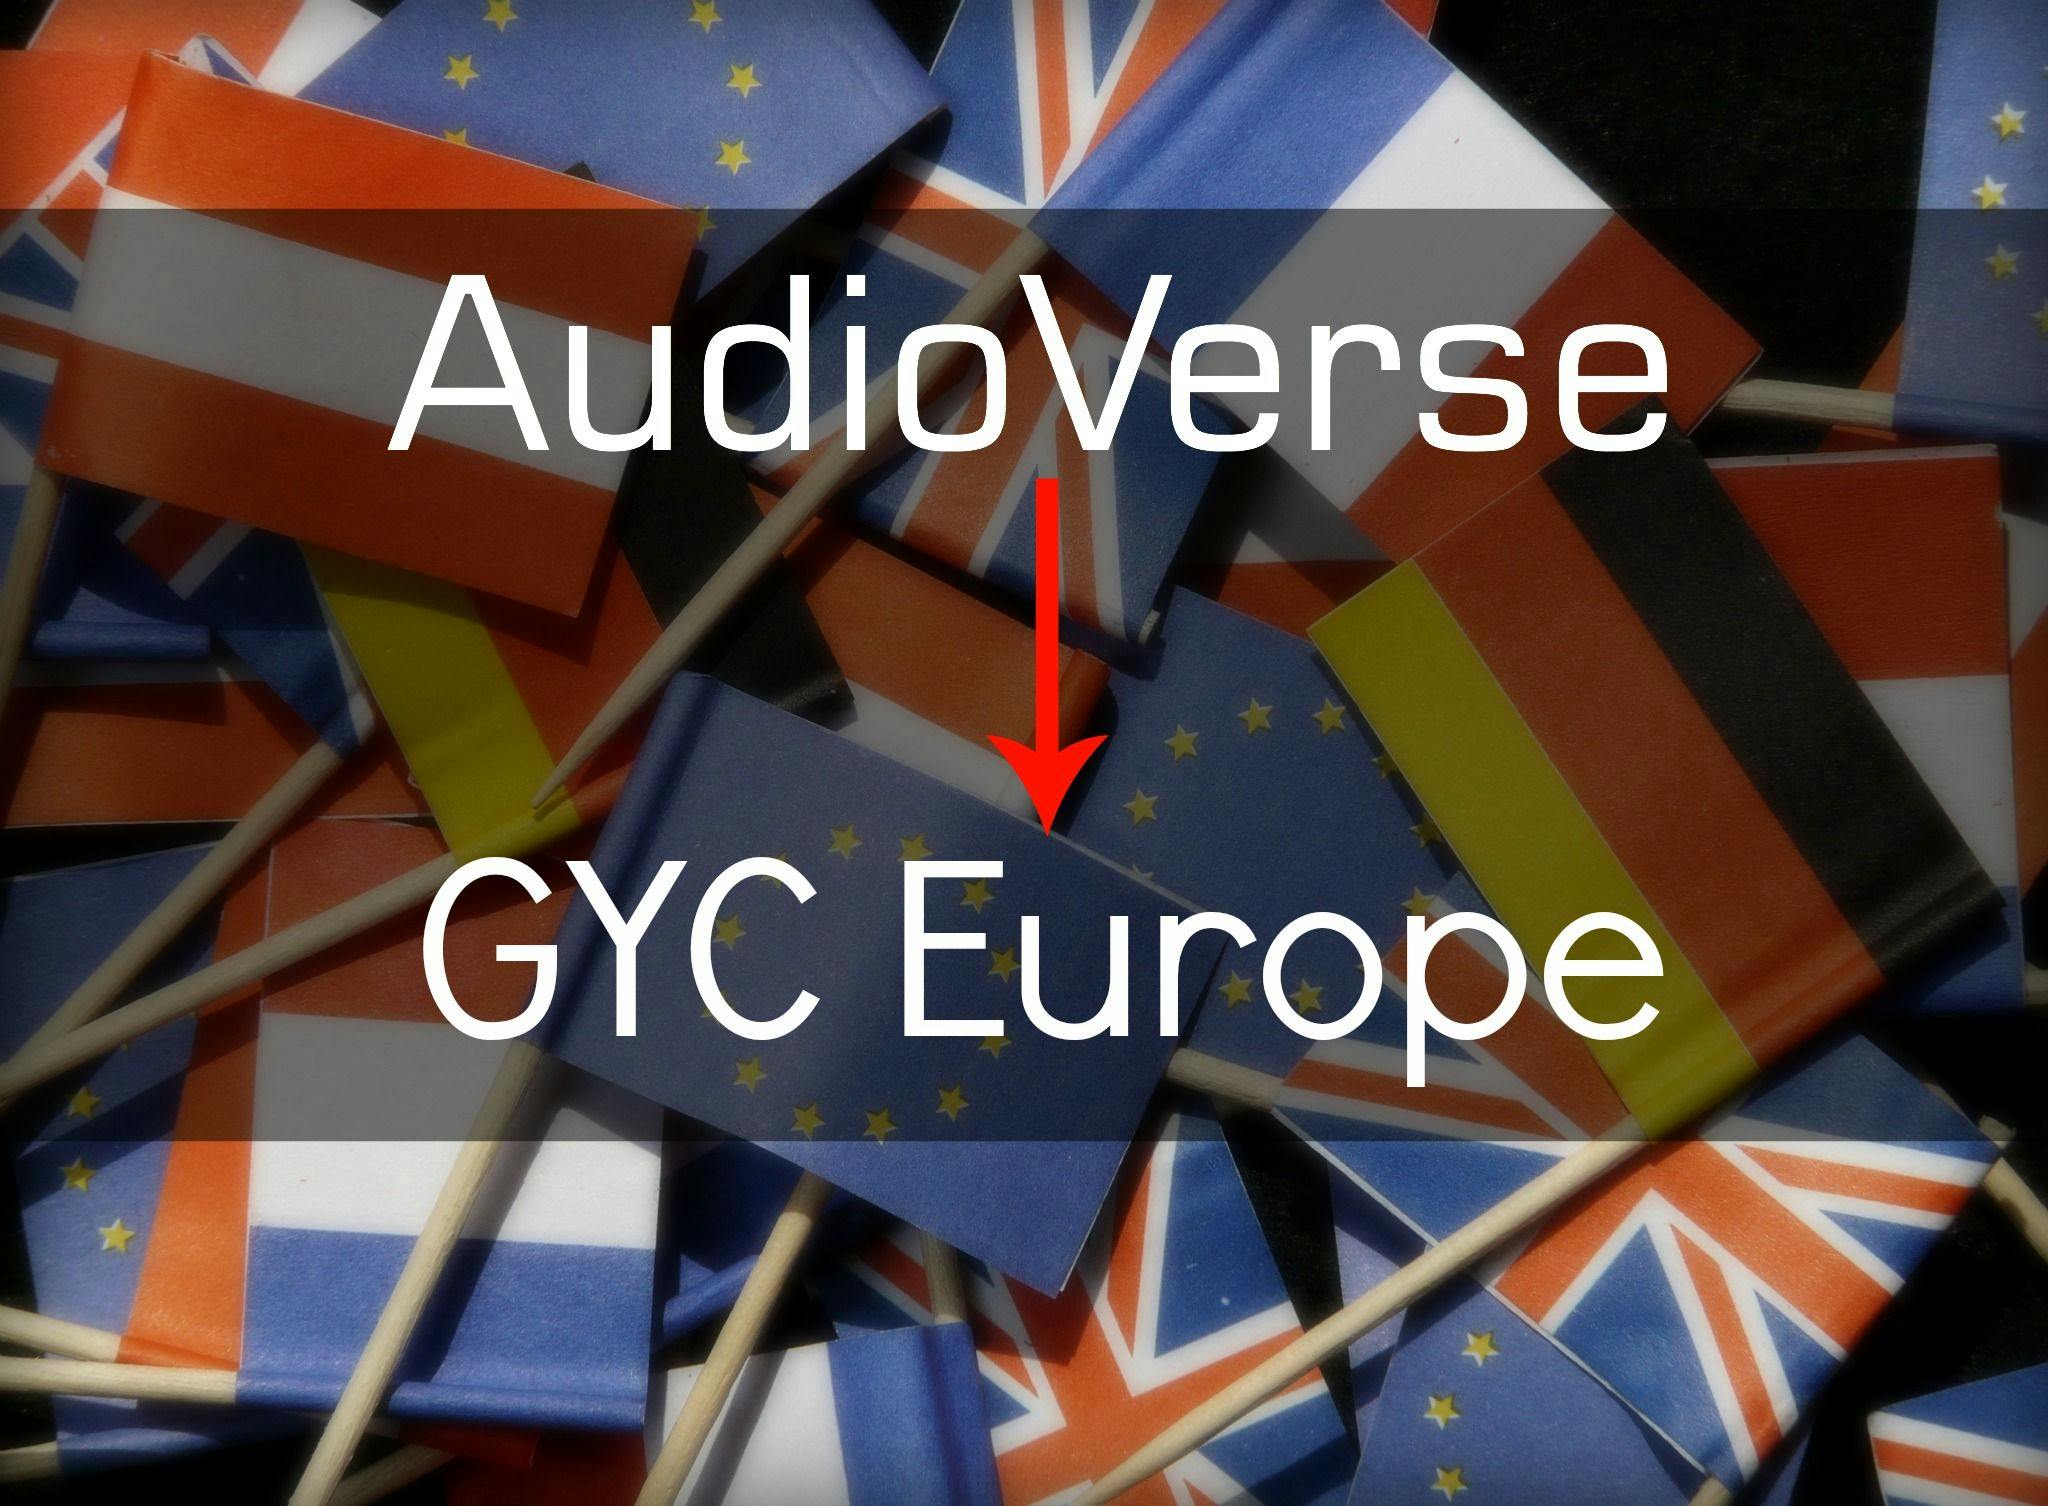 AudioVerse is Going to GYC Europe!